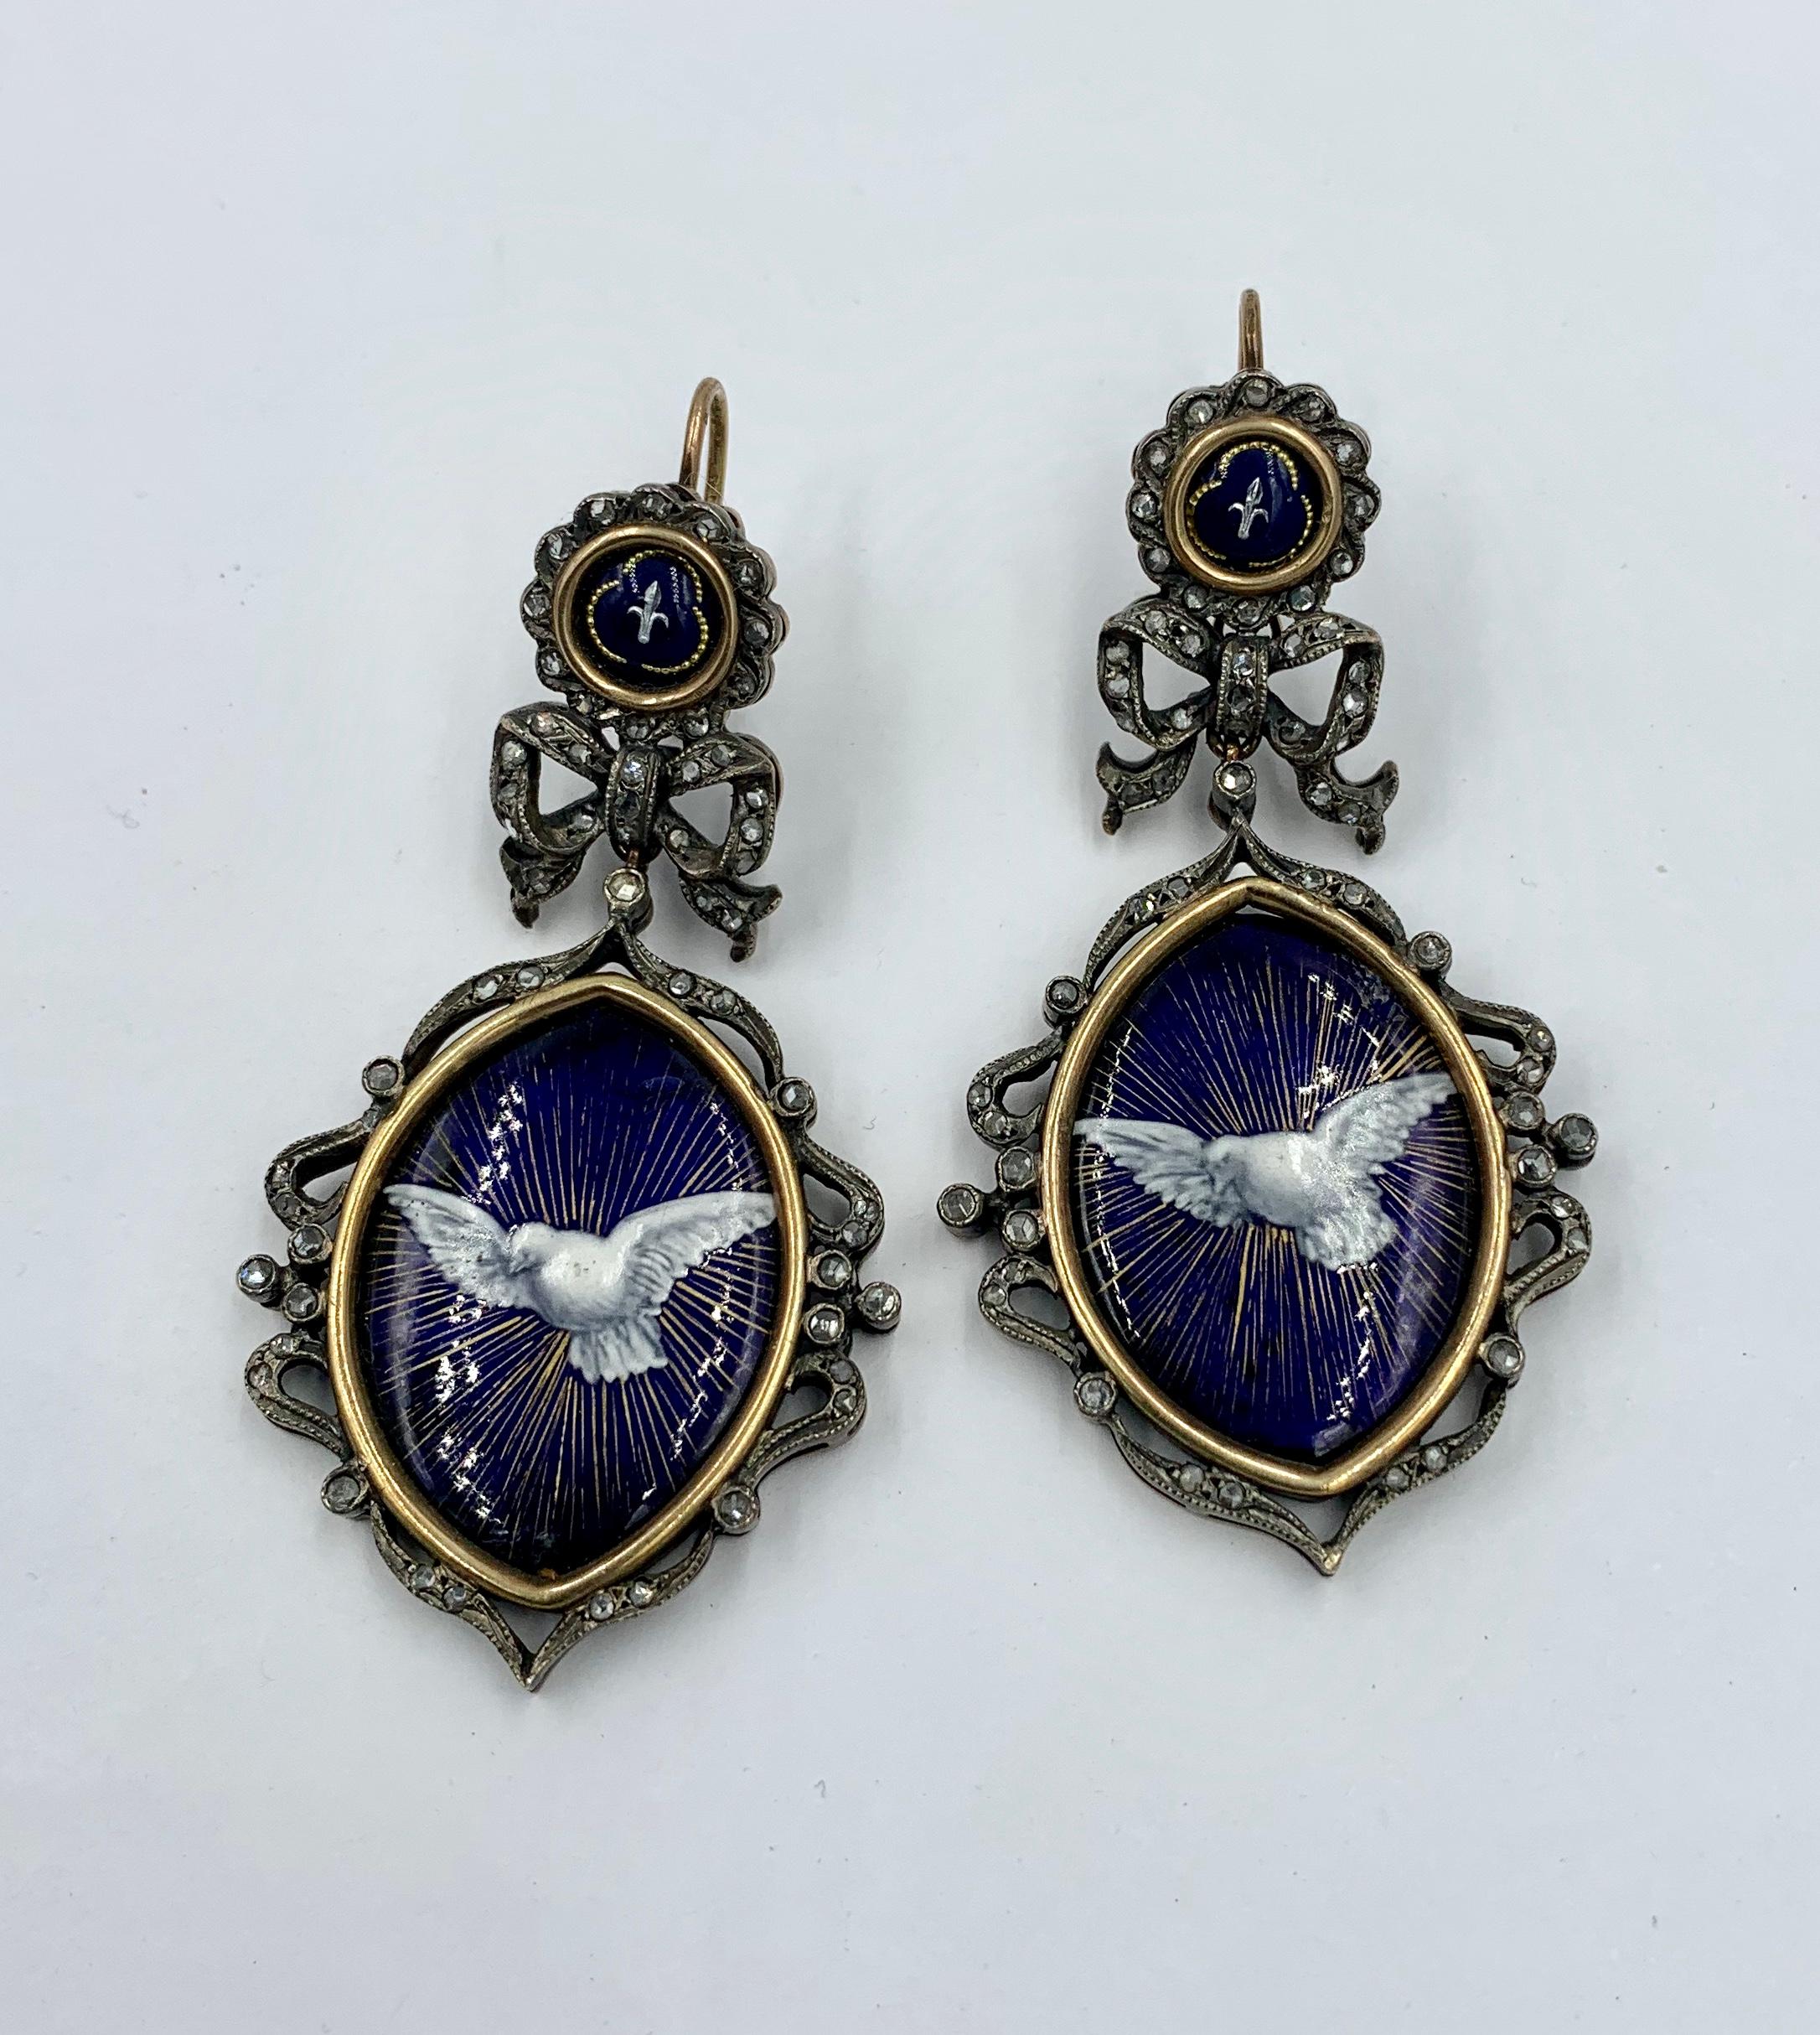 The extraordinary Enamel Rose Cut Diamond Dove Bird Earrings are Museum Quality Jewels which date to the Georgian to Victorian period.   The pendant dangle drop earrings have an image of a dove in flight against a royal blue background with the